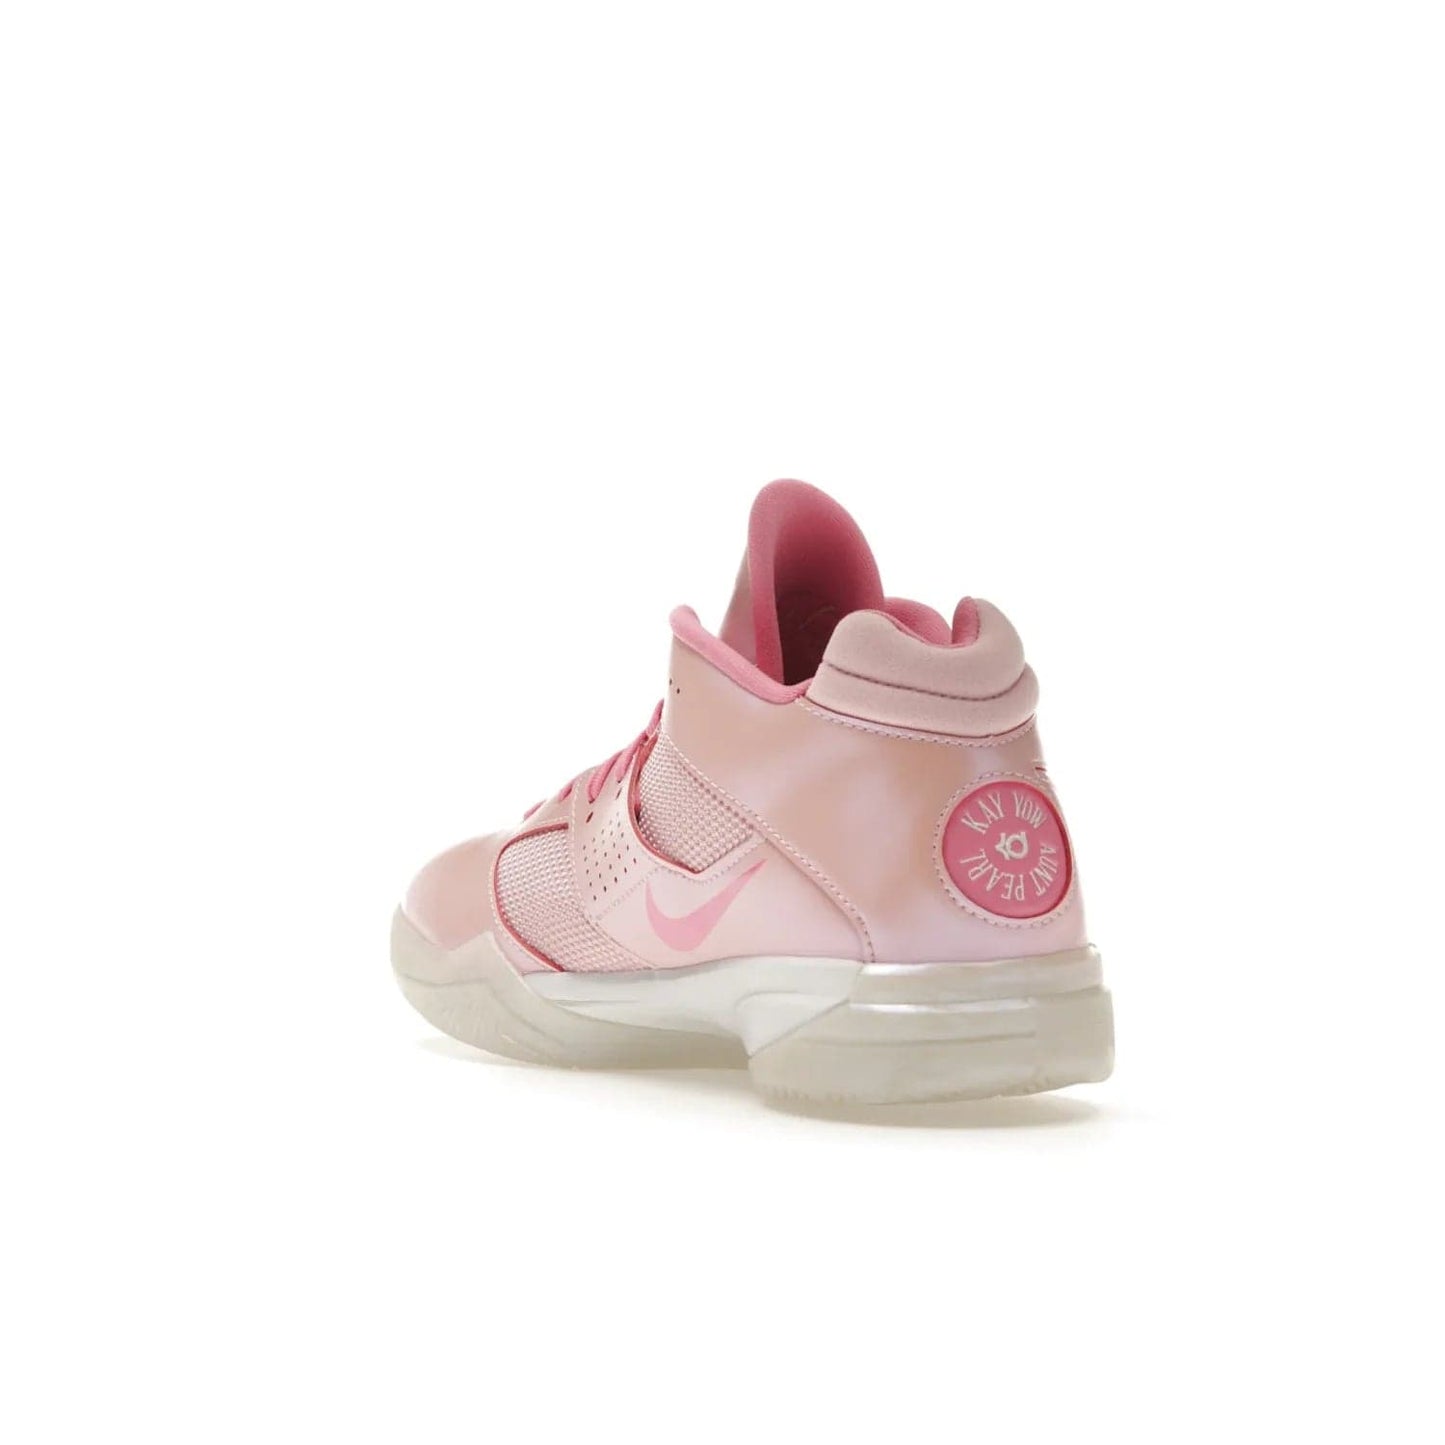 Nike KD 3 Aunt Pearl - Image 25 - Only at www.BallersClubKickz.com - Introducing the Nike KD 3 Aunt Pearl. Featuring a bold Medium Soft Pink, White, & Lotus Pink colorway. Get ready to stand out this October 15th.